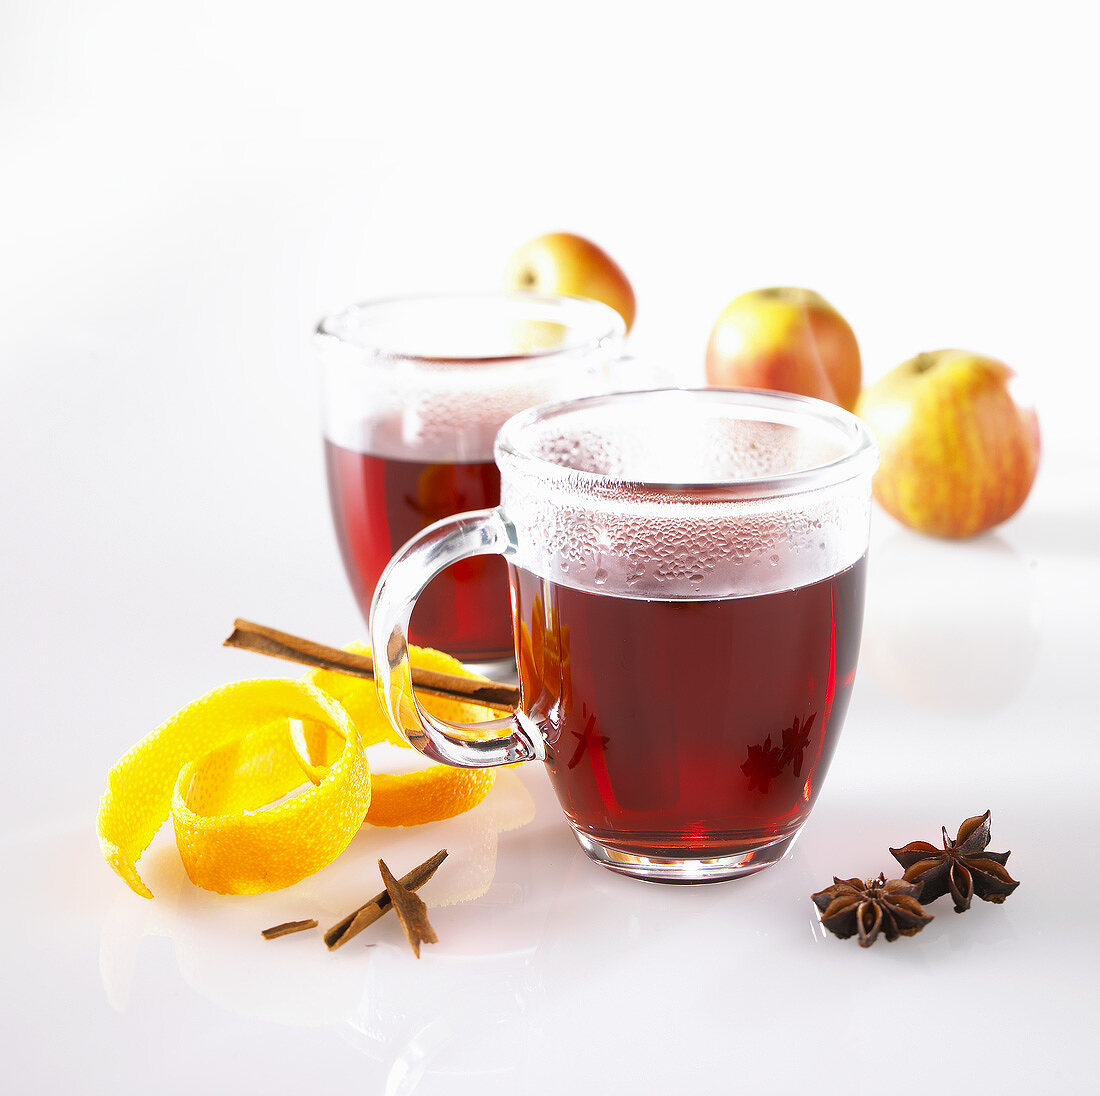 Mulled wine in glass mugs, orange peel, spices and apples